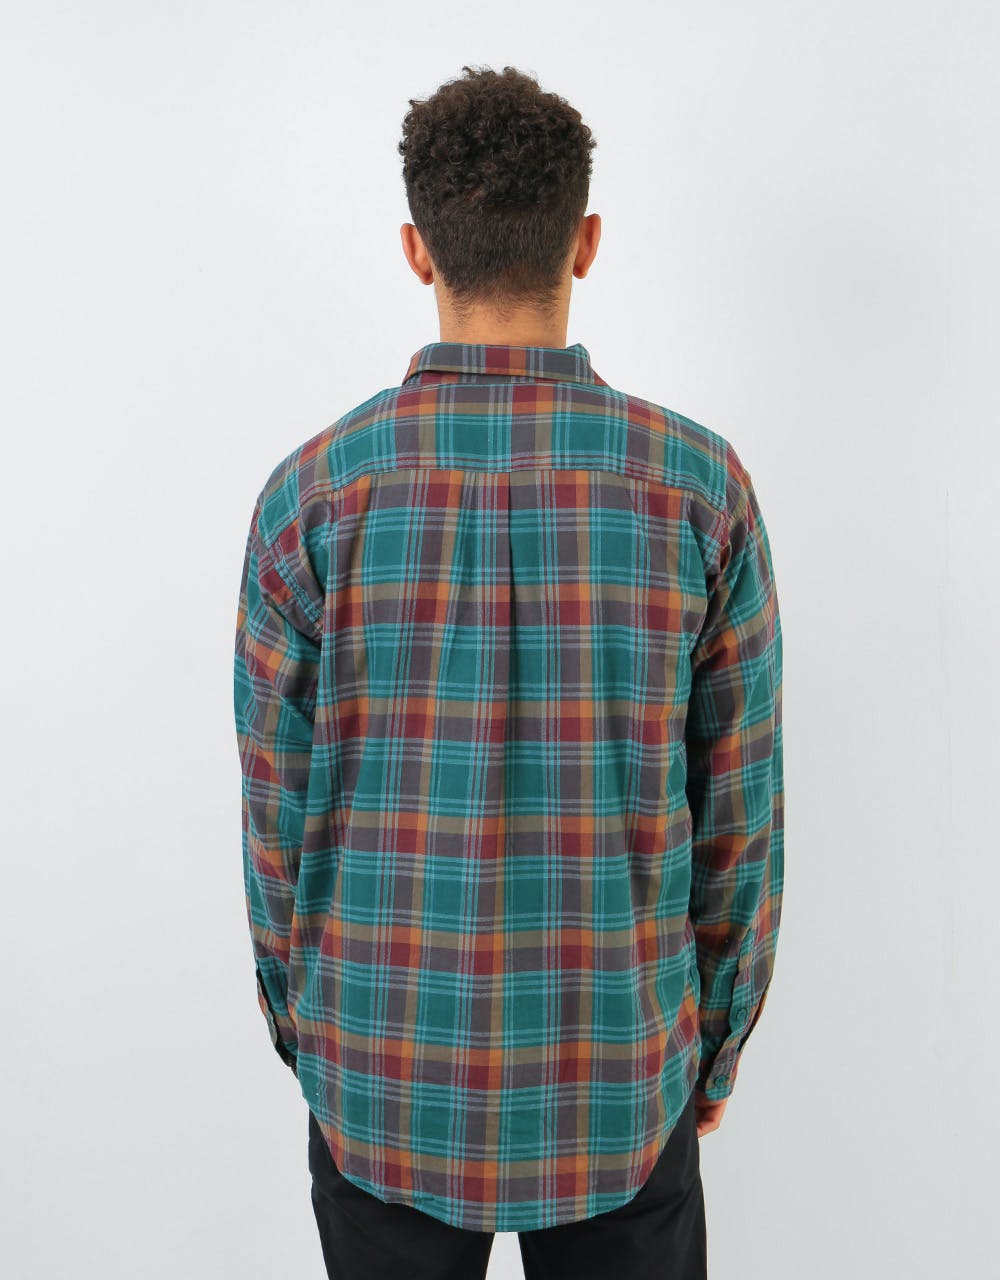 Patagonia L/S Pima Cotton Shirt - Buttes Small: Piki Green